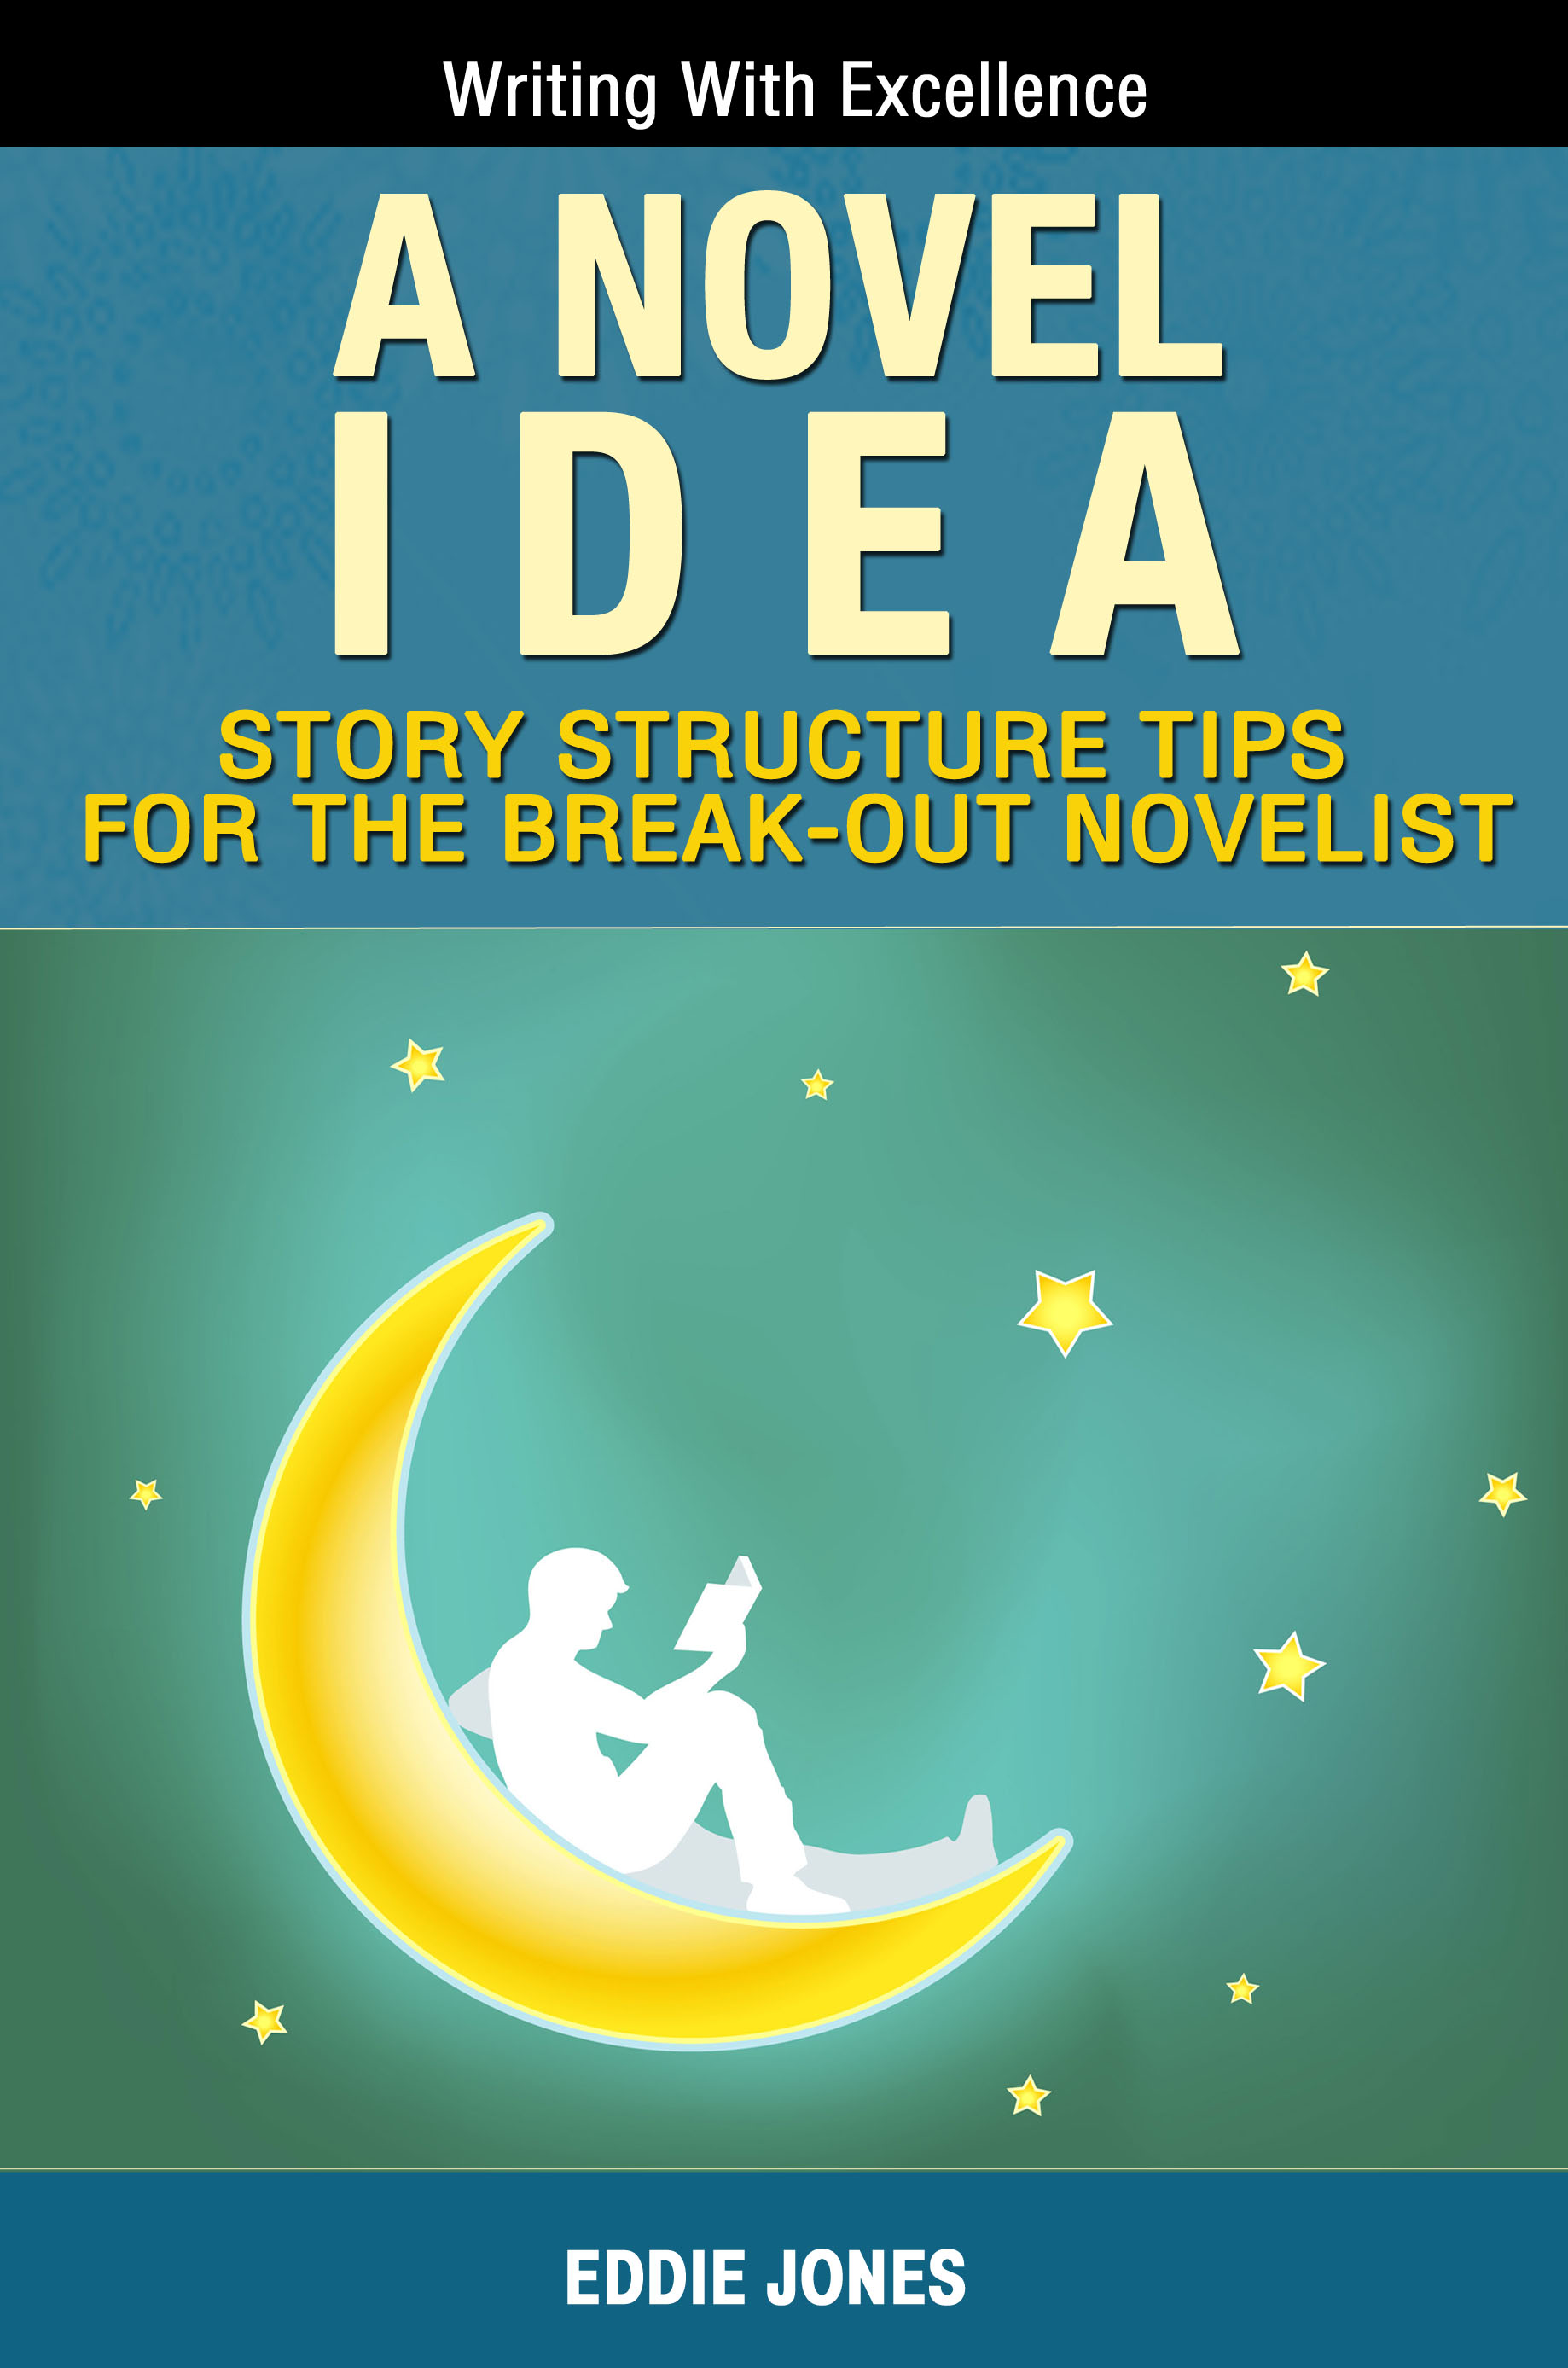 A Novel Idea - Learn How to Write a Novel in Under 60 Minutes